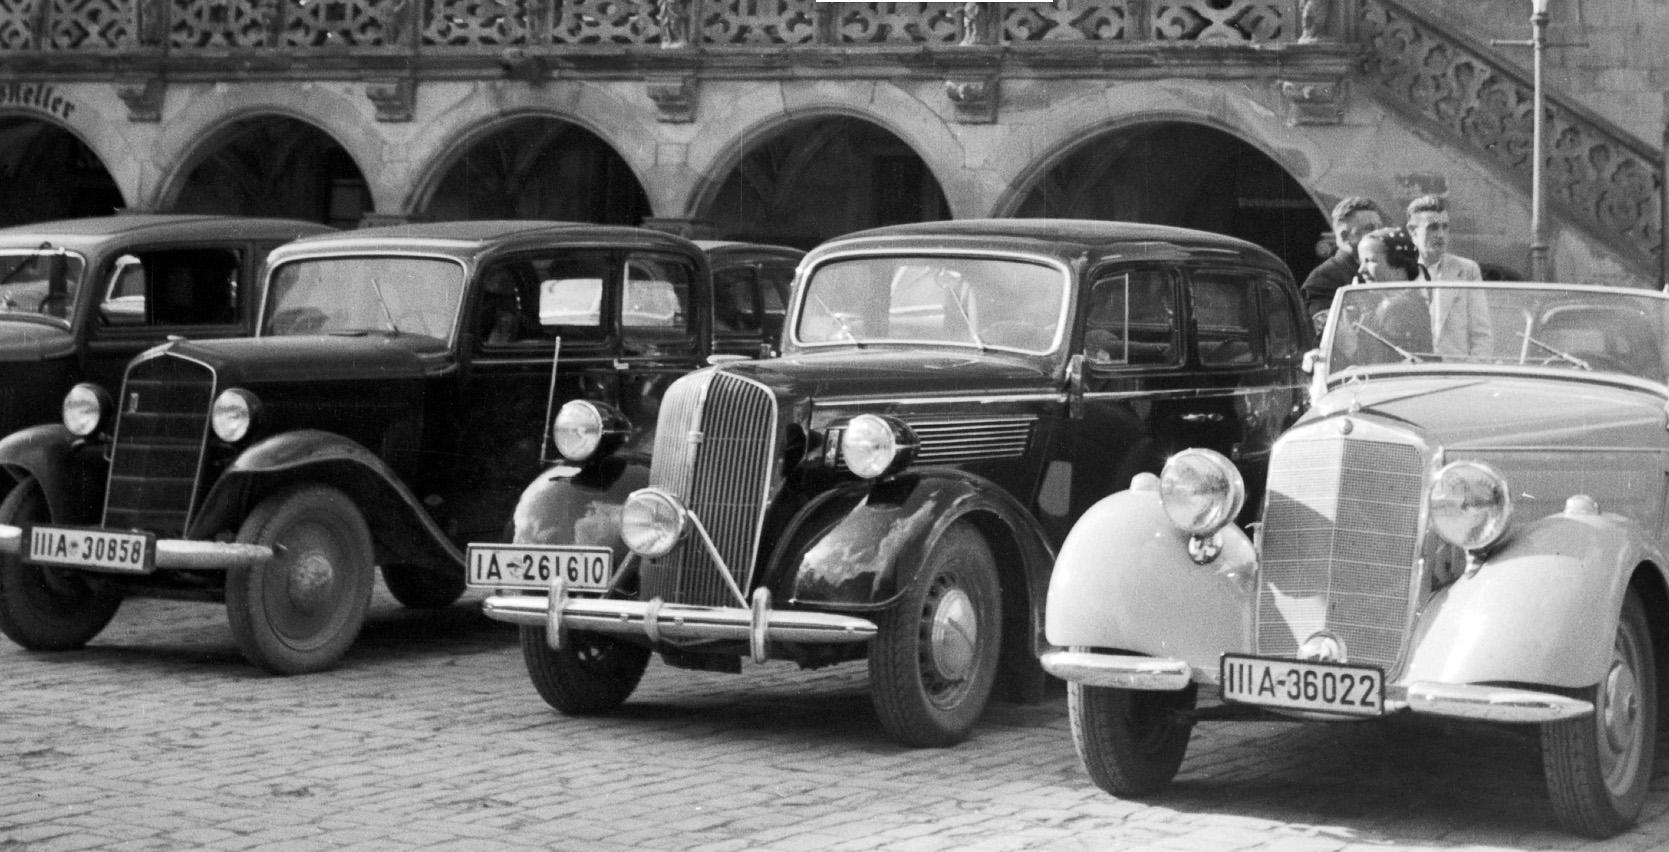 Cars parking at old Heidelberg city hall, Germany 1936, Printed Later  - Photograph by Karl Heinrich Lämmel